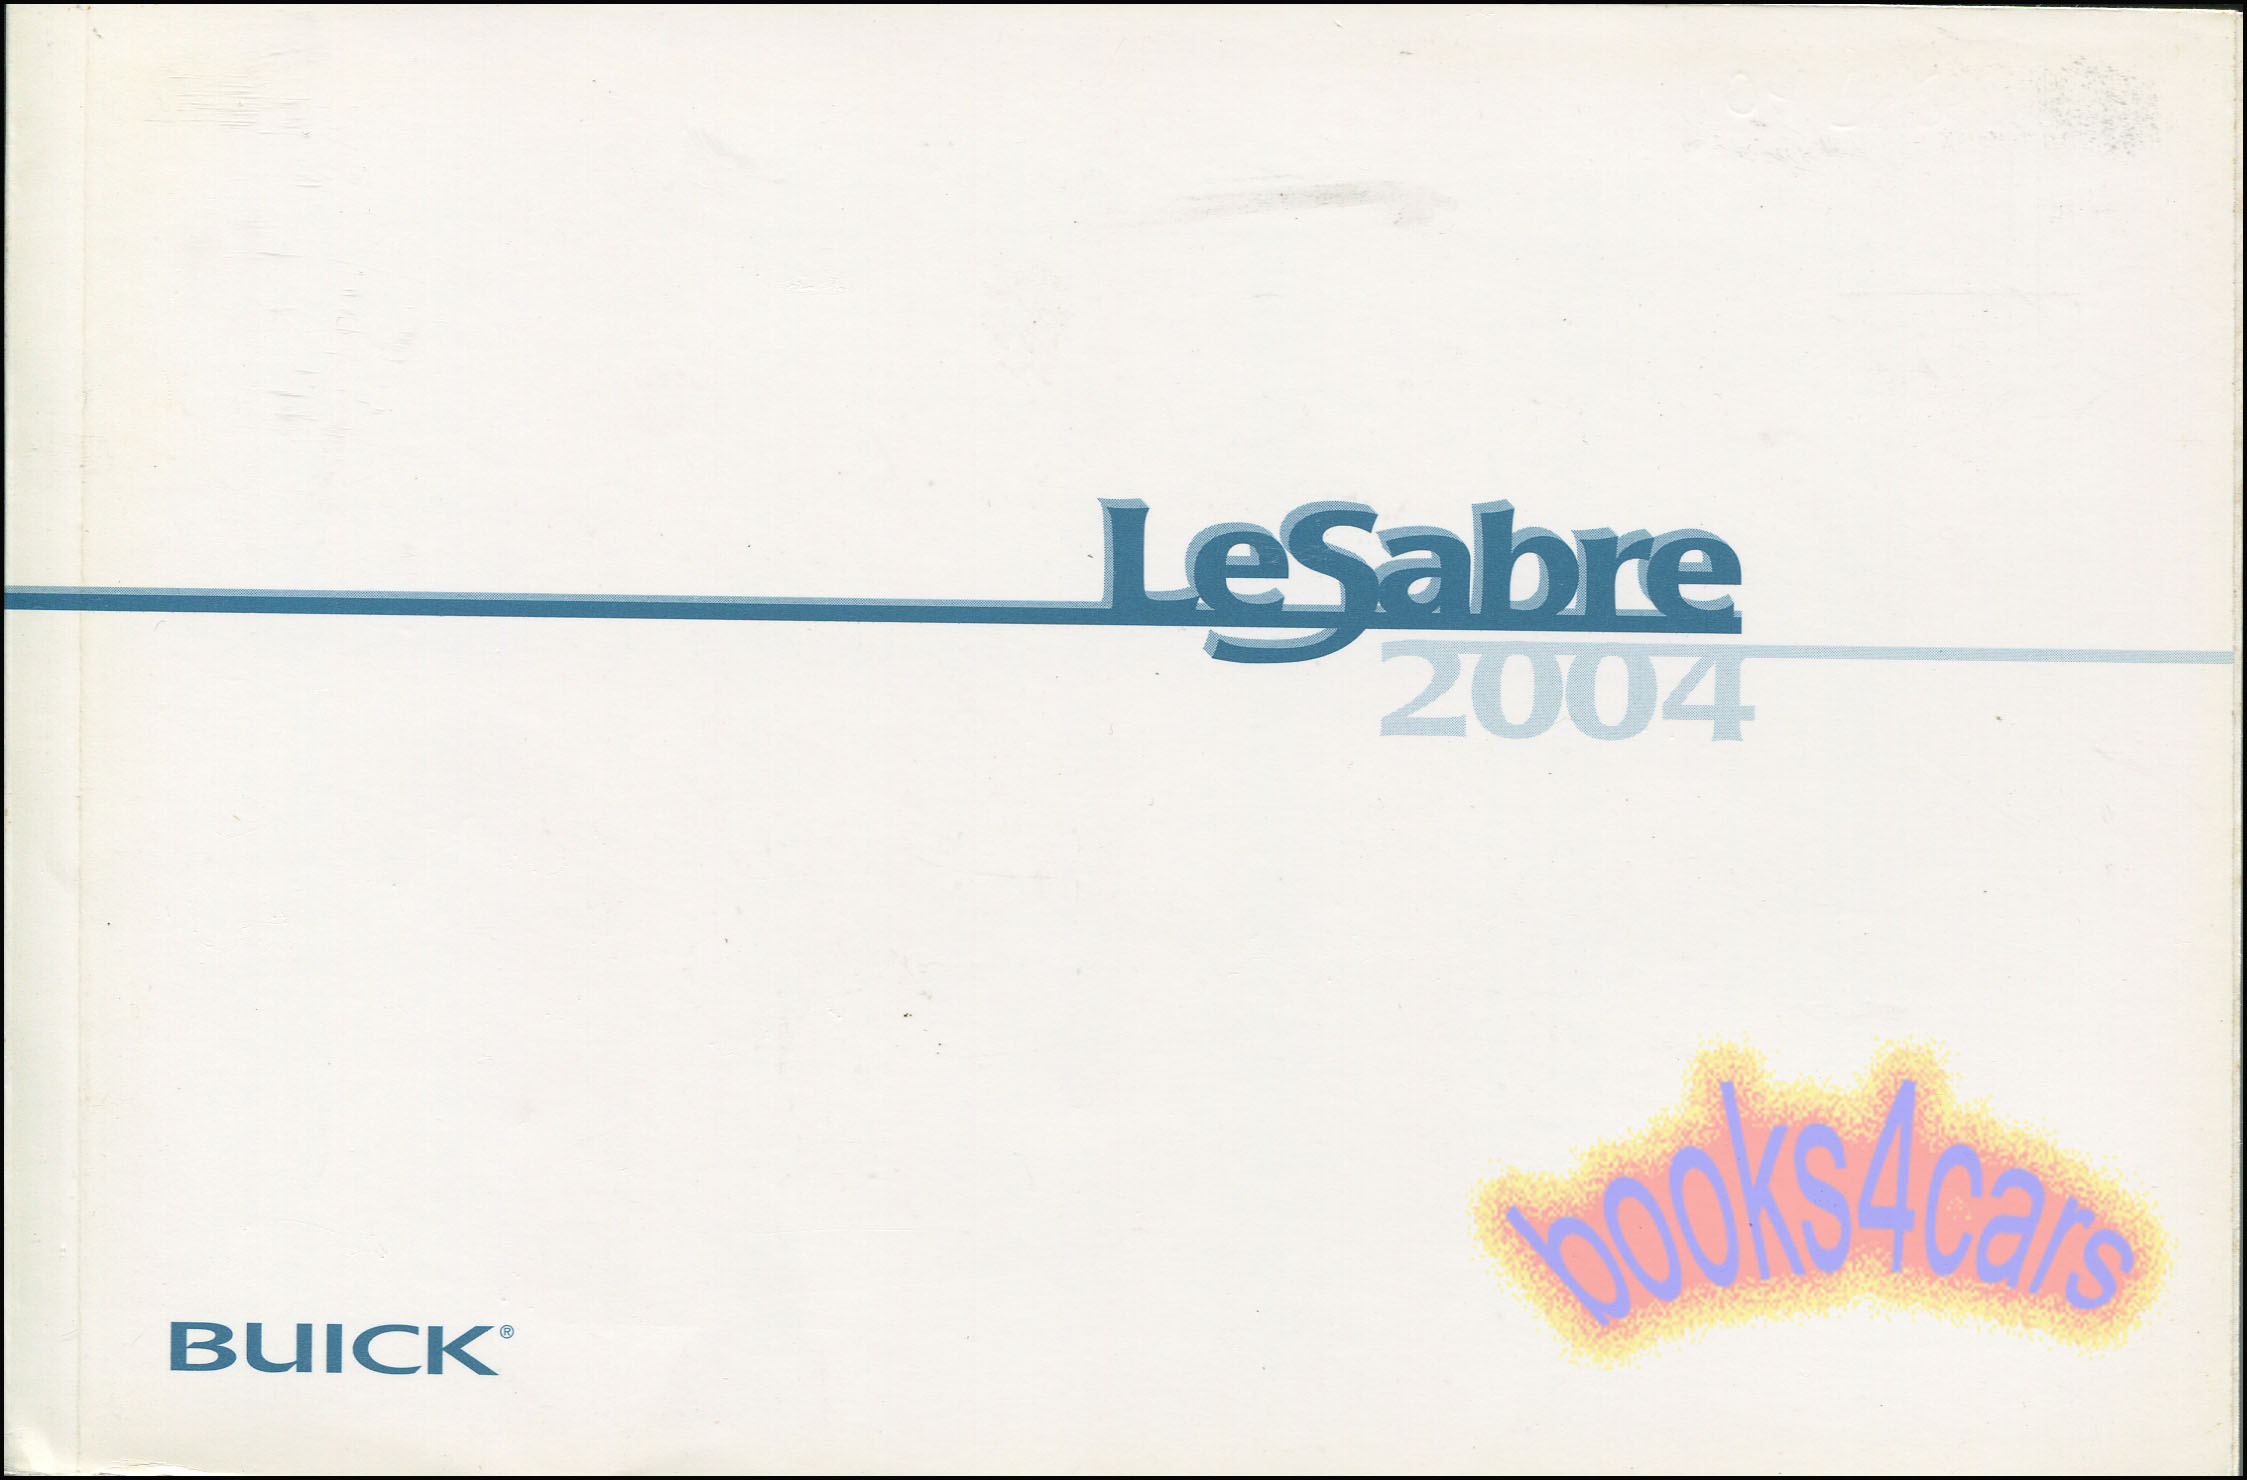 2004 LeSabre Owners Manual by Buick